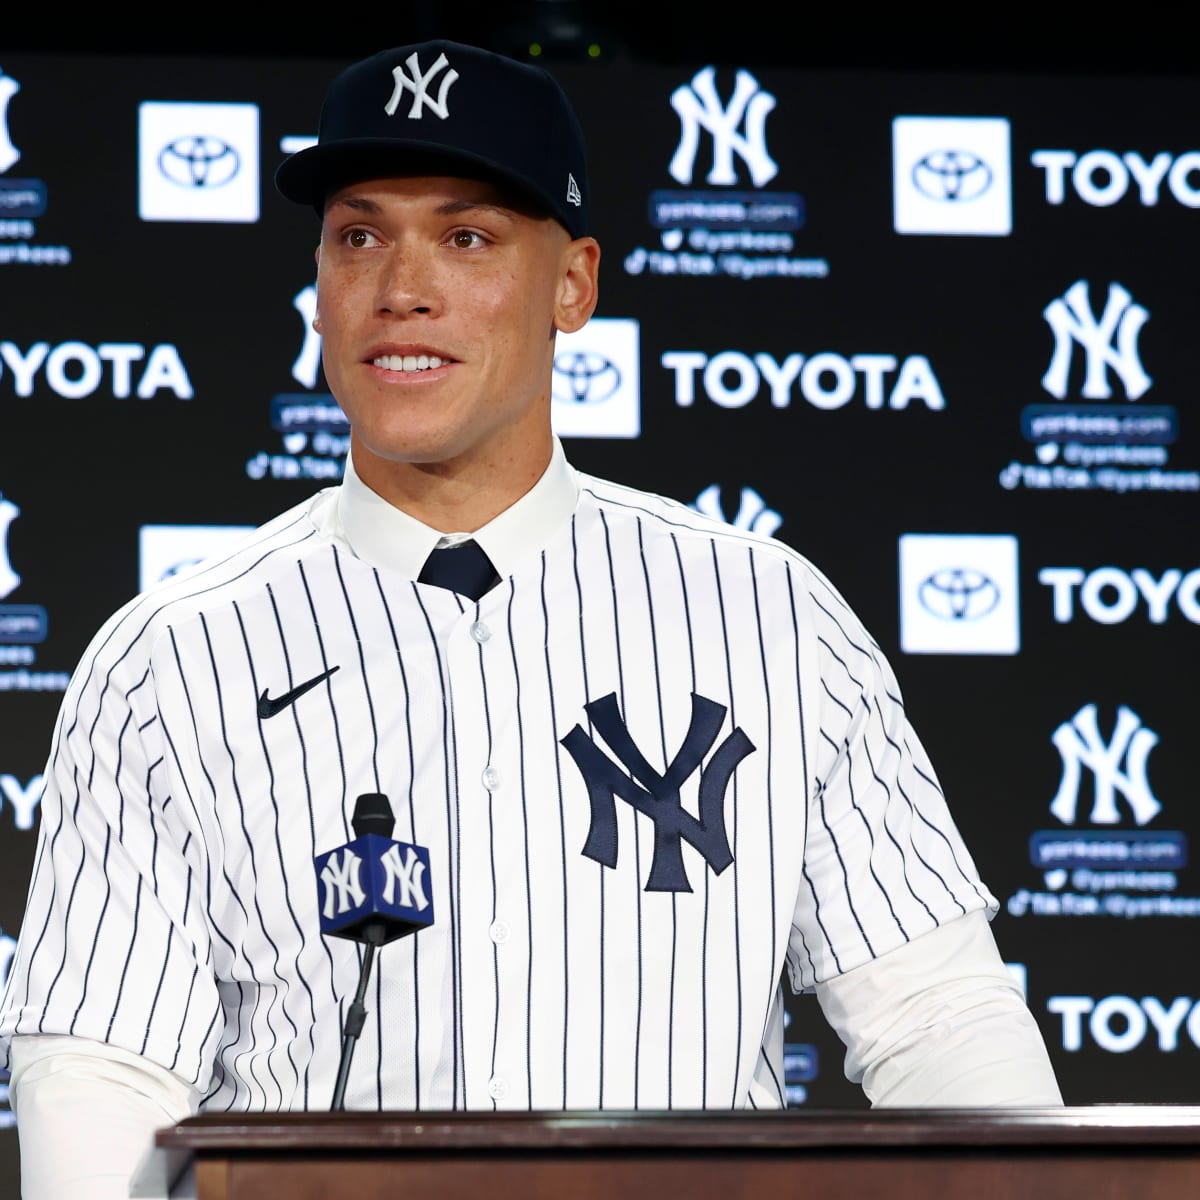 Is Aaron Judge suddenly the most popular active athlete among